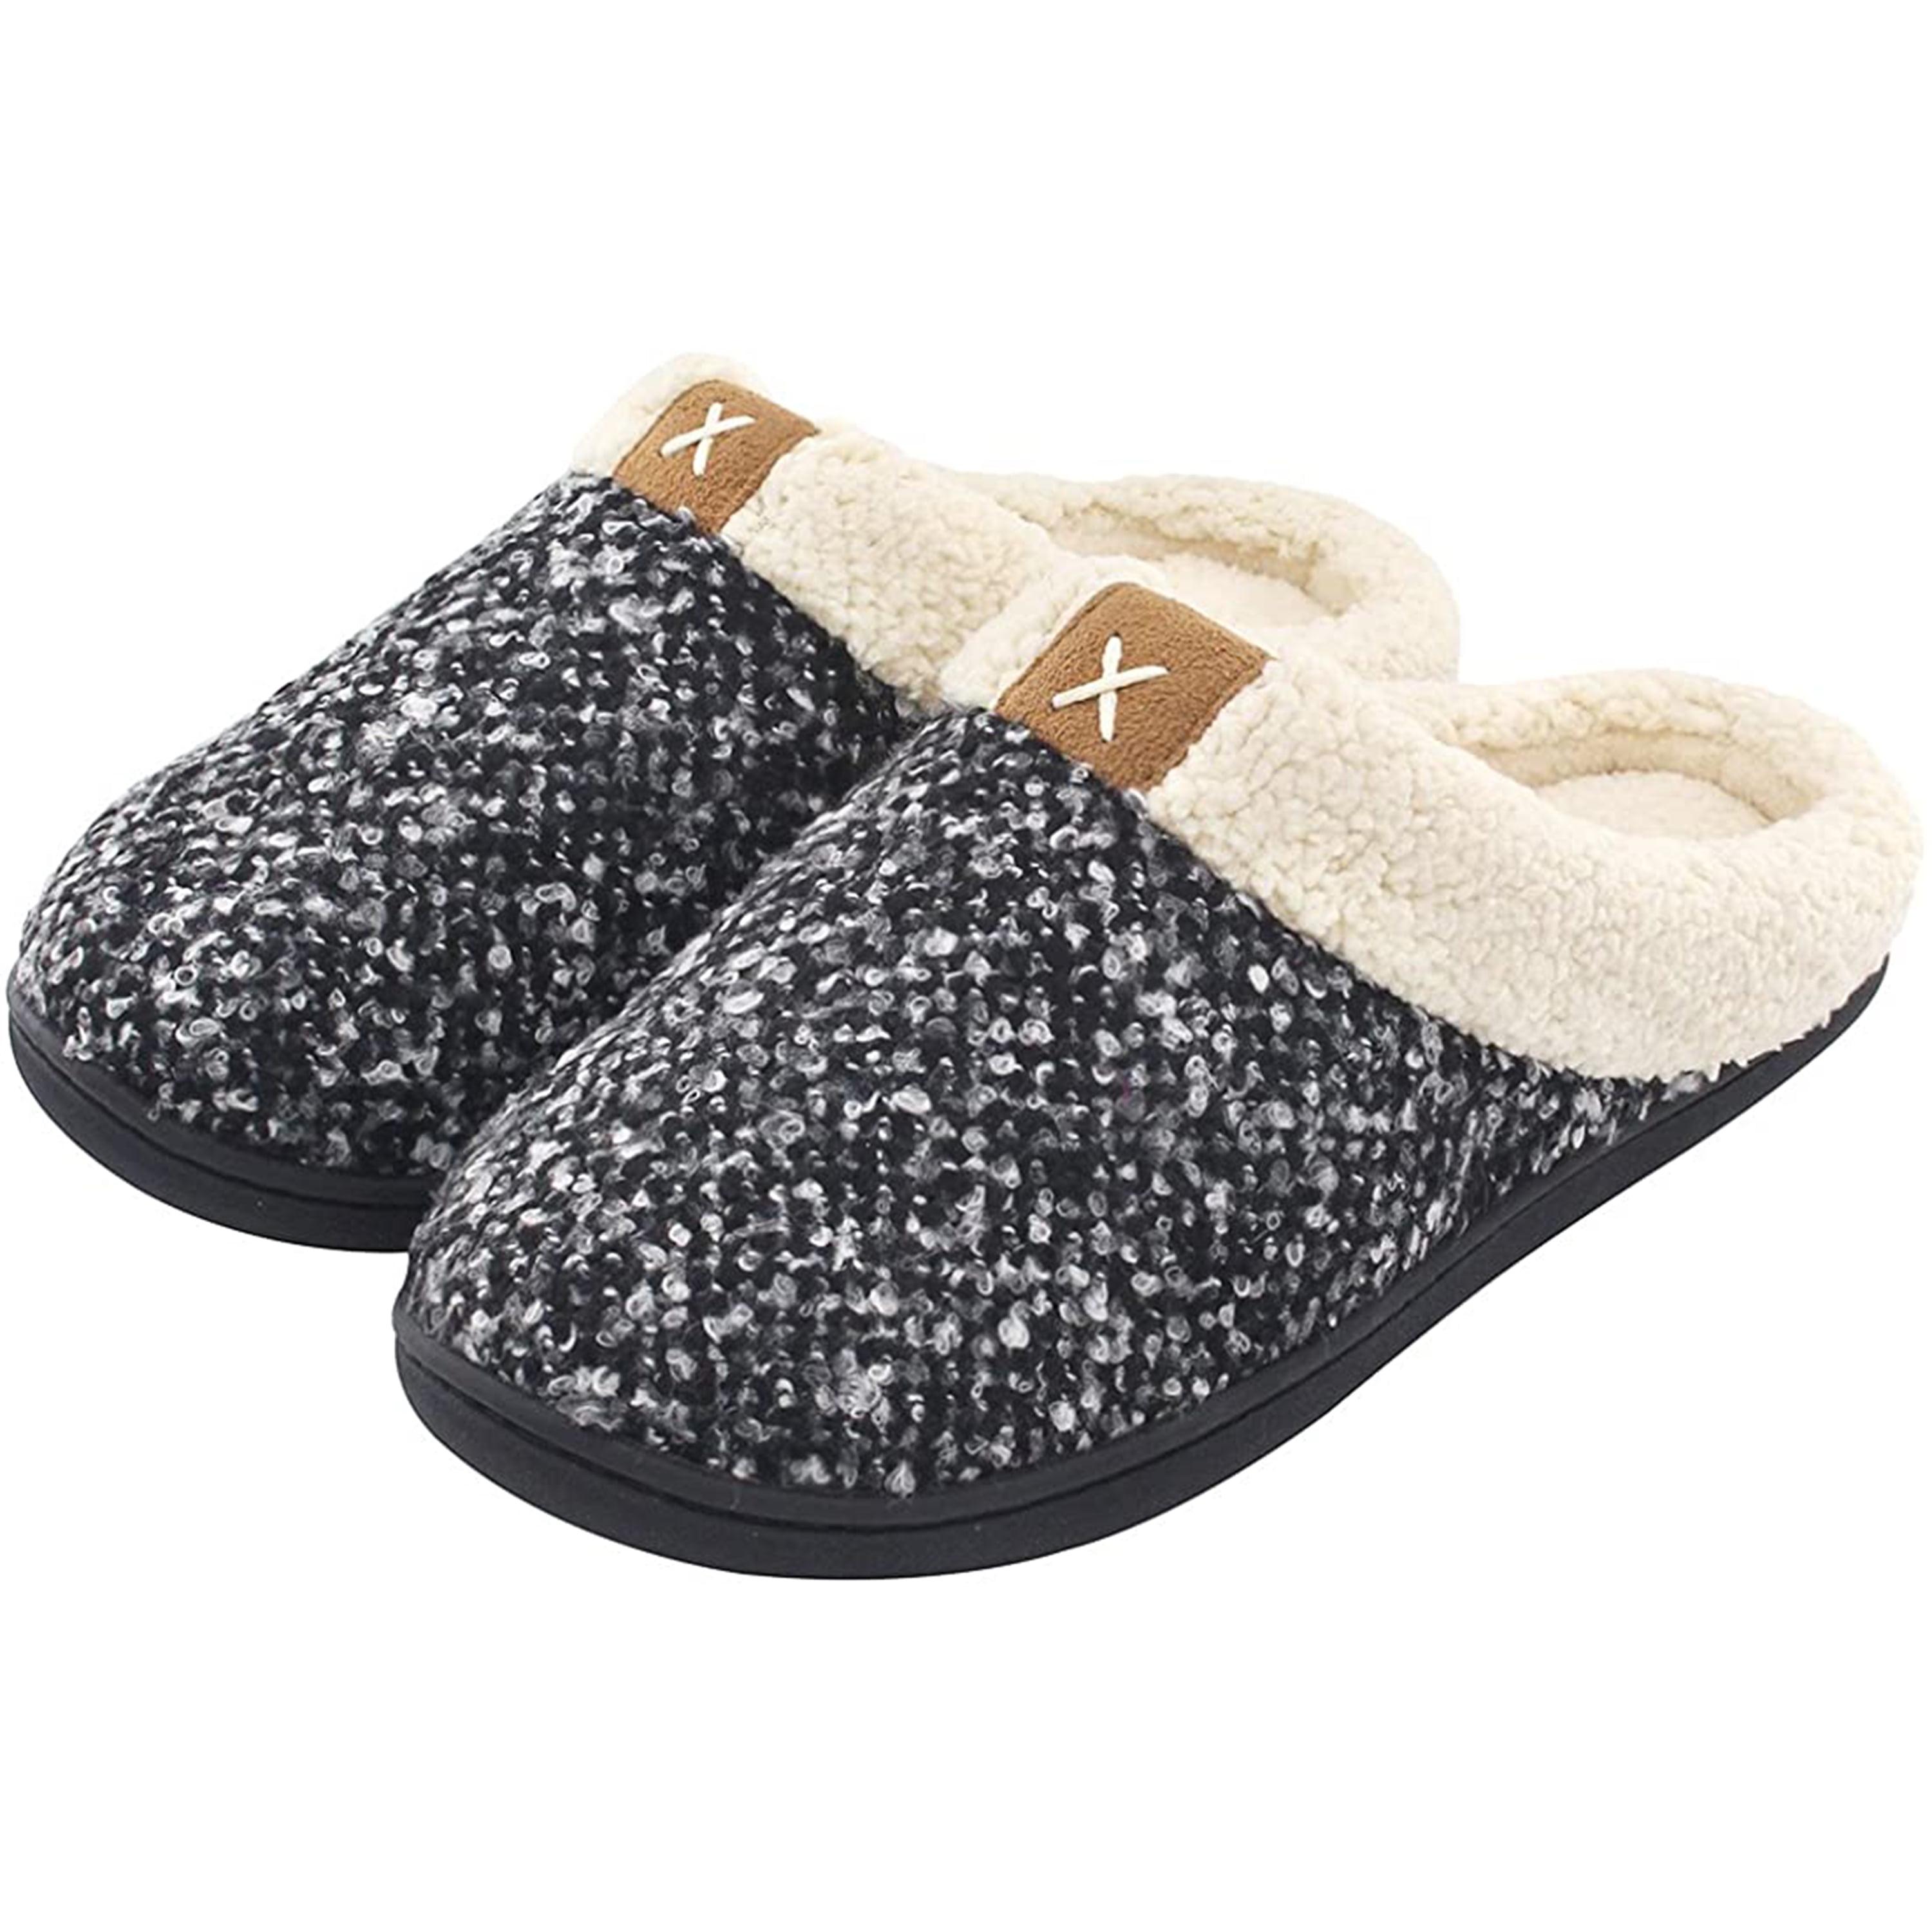 ULTRAIDEAS Women’s Cosy Slippers Lightweight Closed Back House Slippers with Indoor Anti-Skid Rubber Sole 